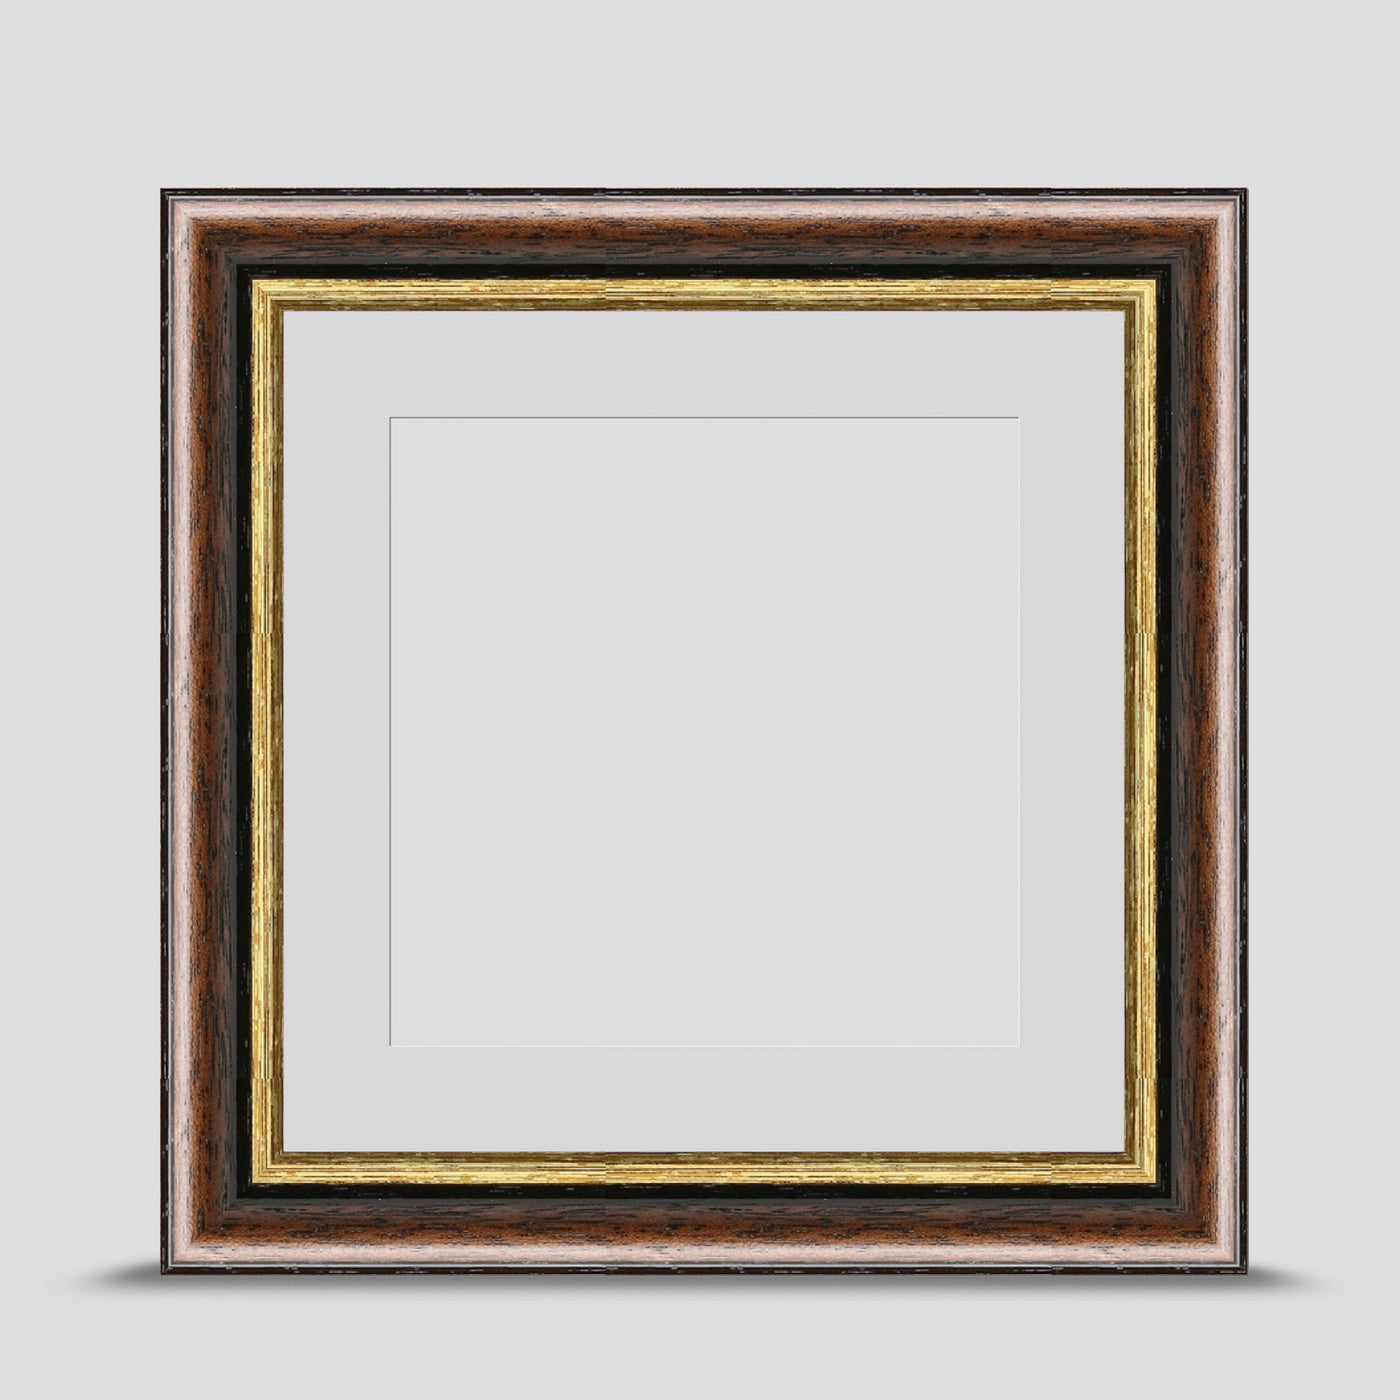 6x6 Brown & Gold Picture Frame with a 4x4 Mount